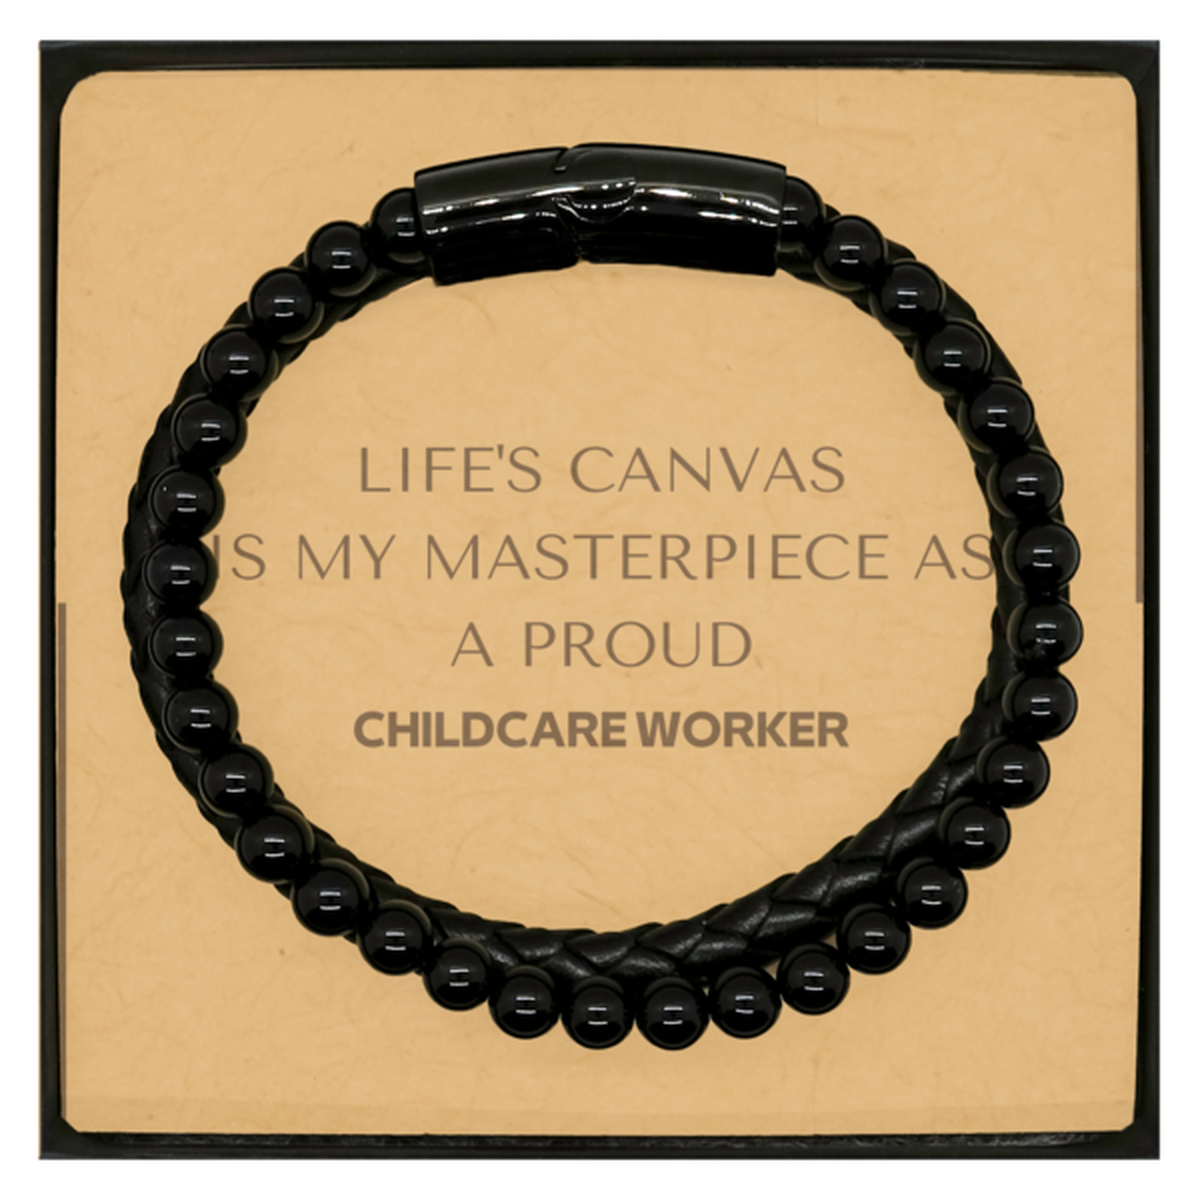 Proud Childcare Worker Gifts, Life's canvas is my masterpiece, Epic Birthday Christmas Unique Stone Leather Bracelets For Childcare Worker, Coworkers, Men, Women, Friends